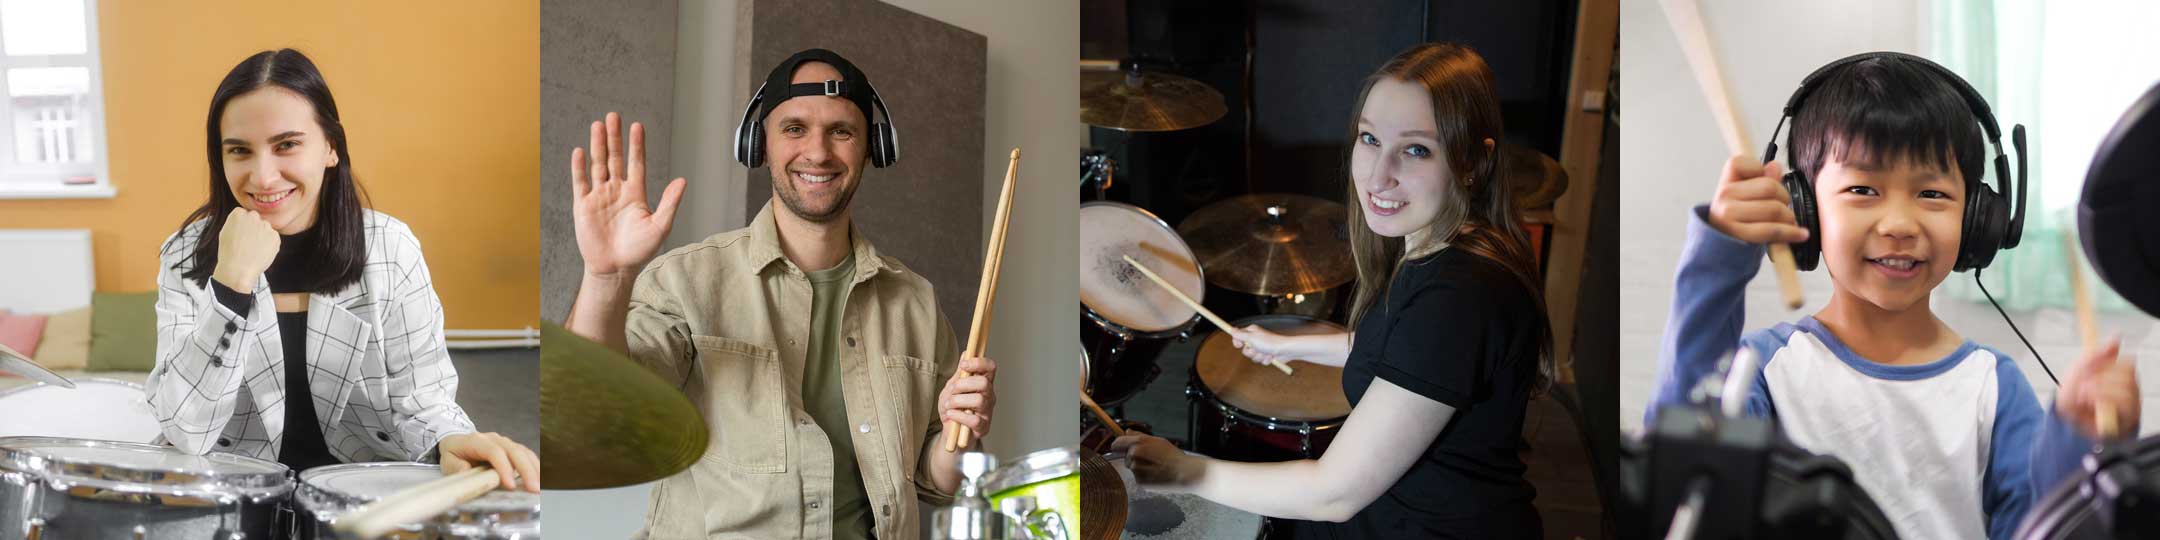 Drum Lessons in San Diego, CA Student Lineup 2